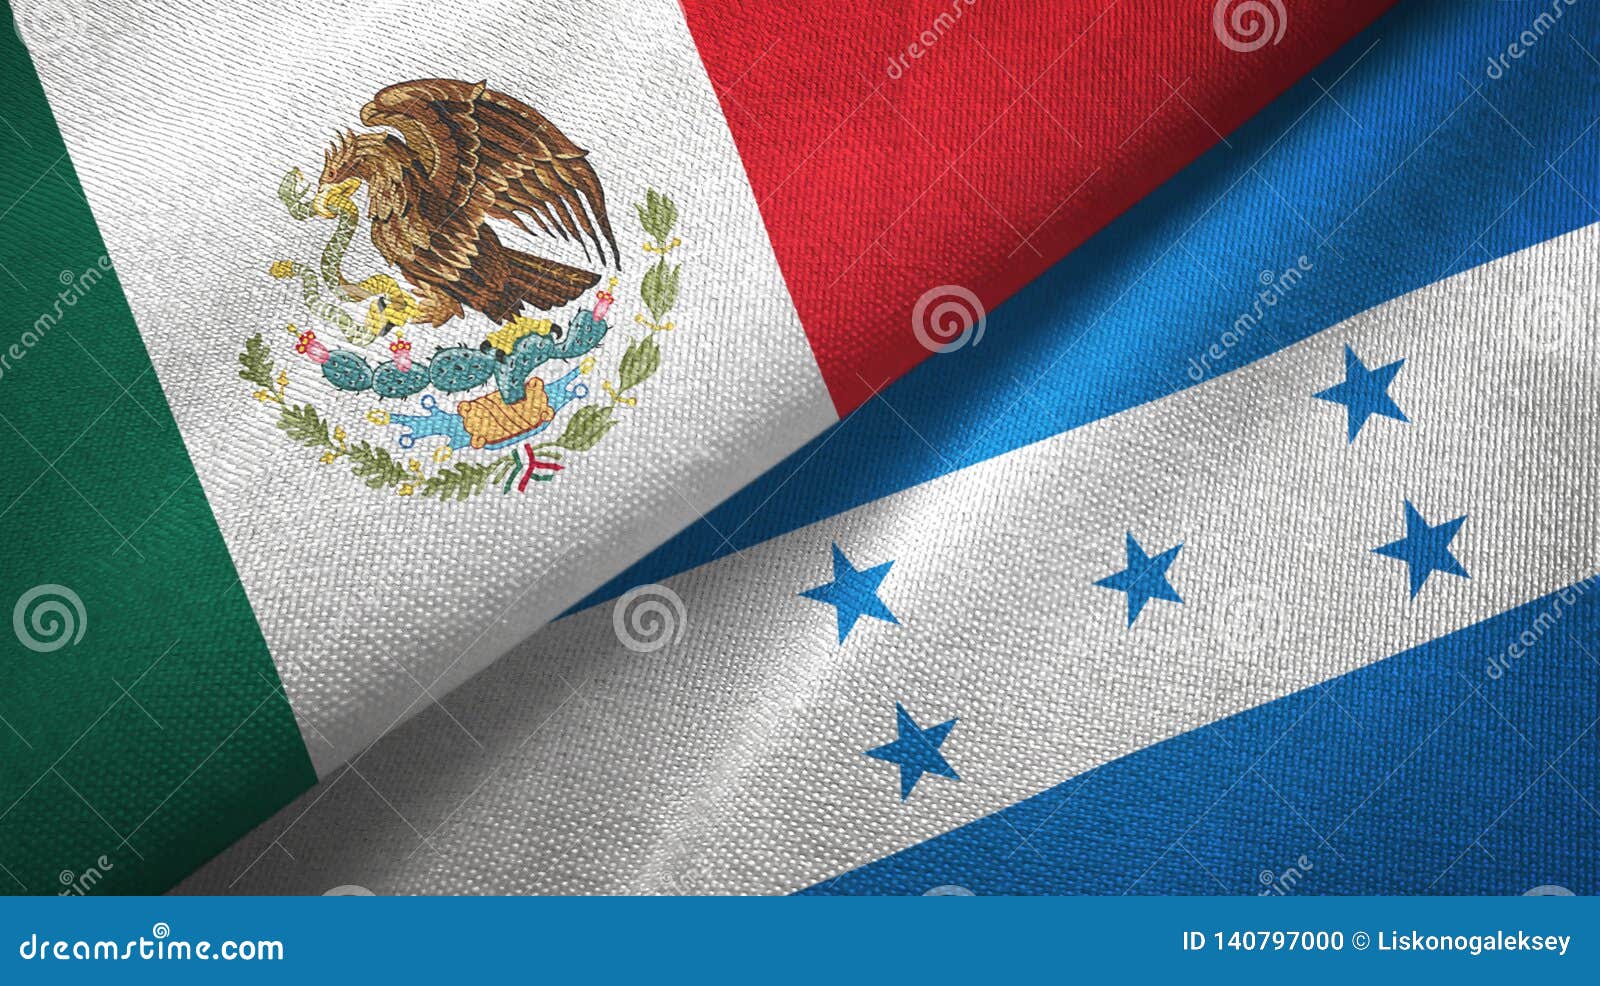 mexico and honduras two flags textile cloth, fabric texture